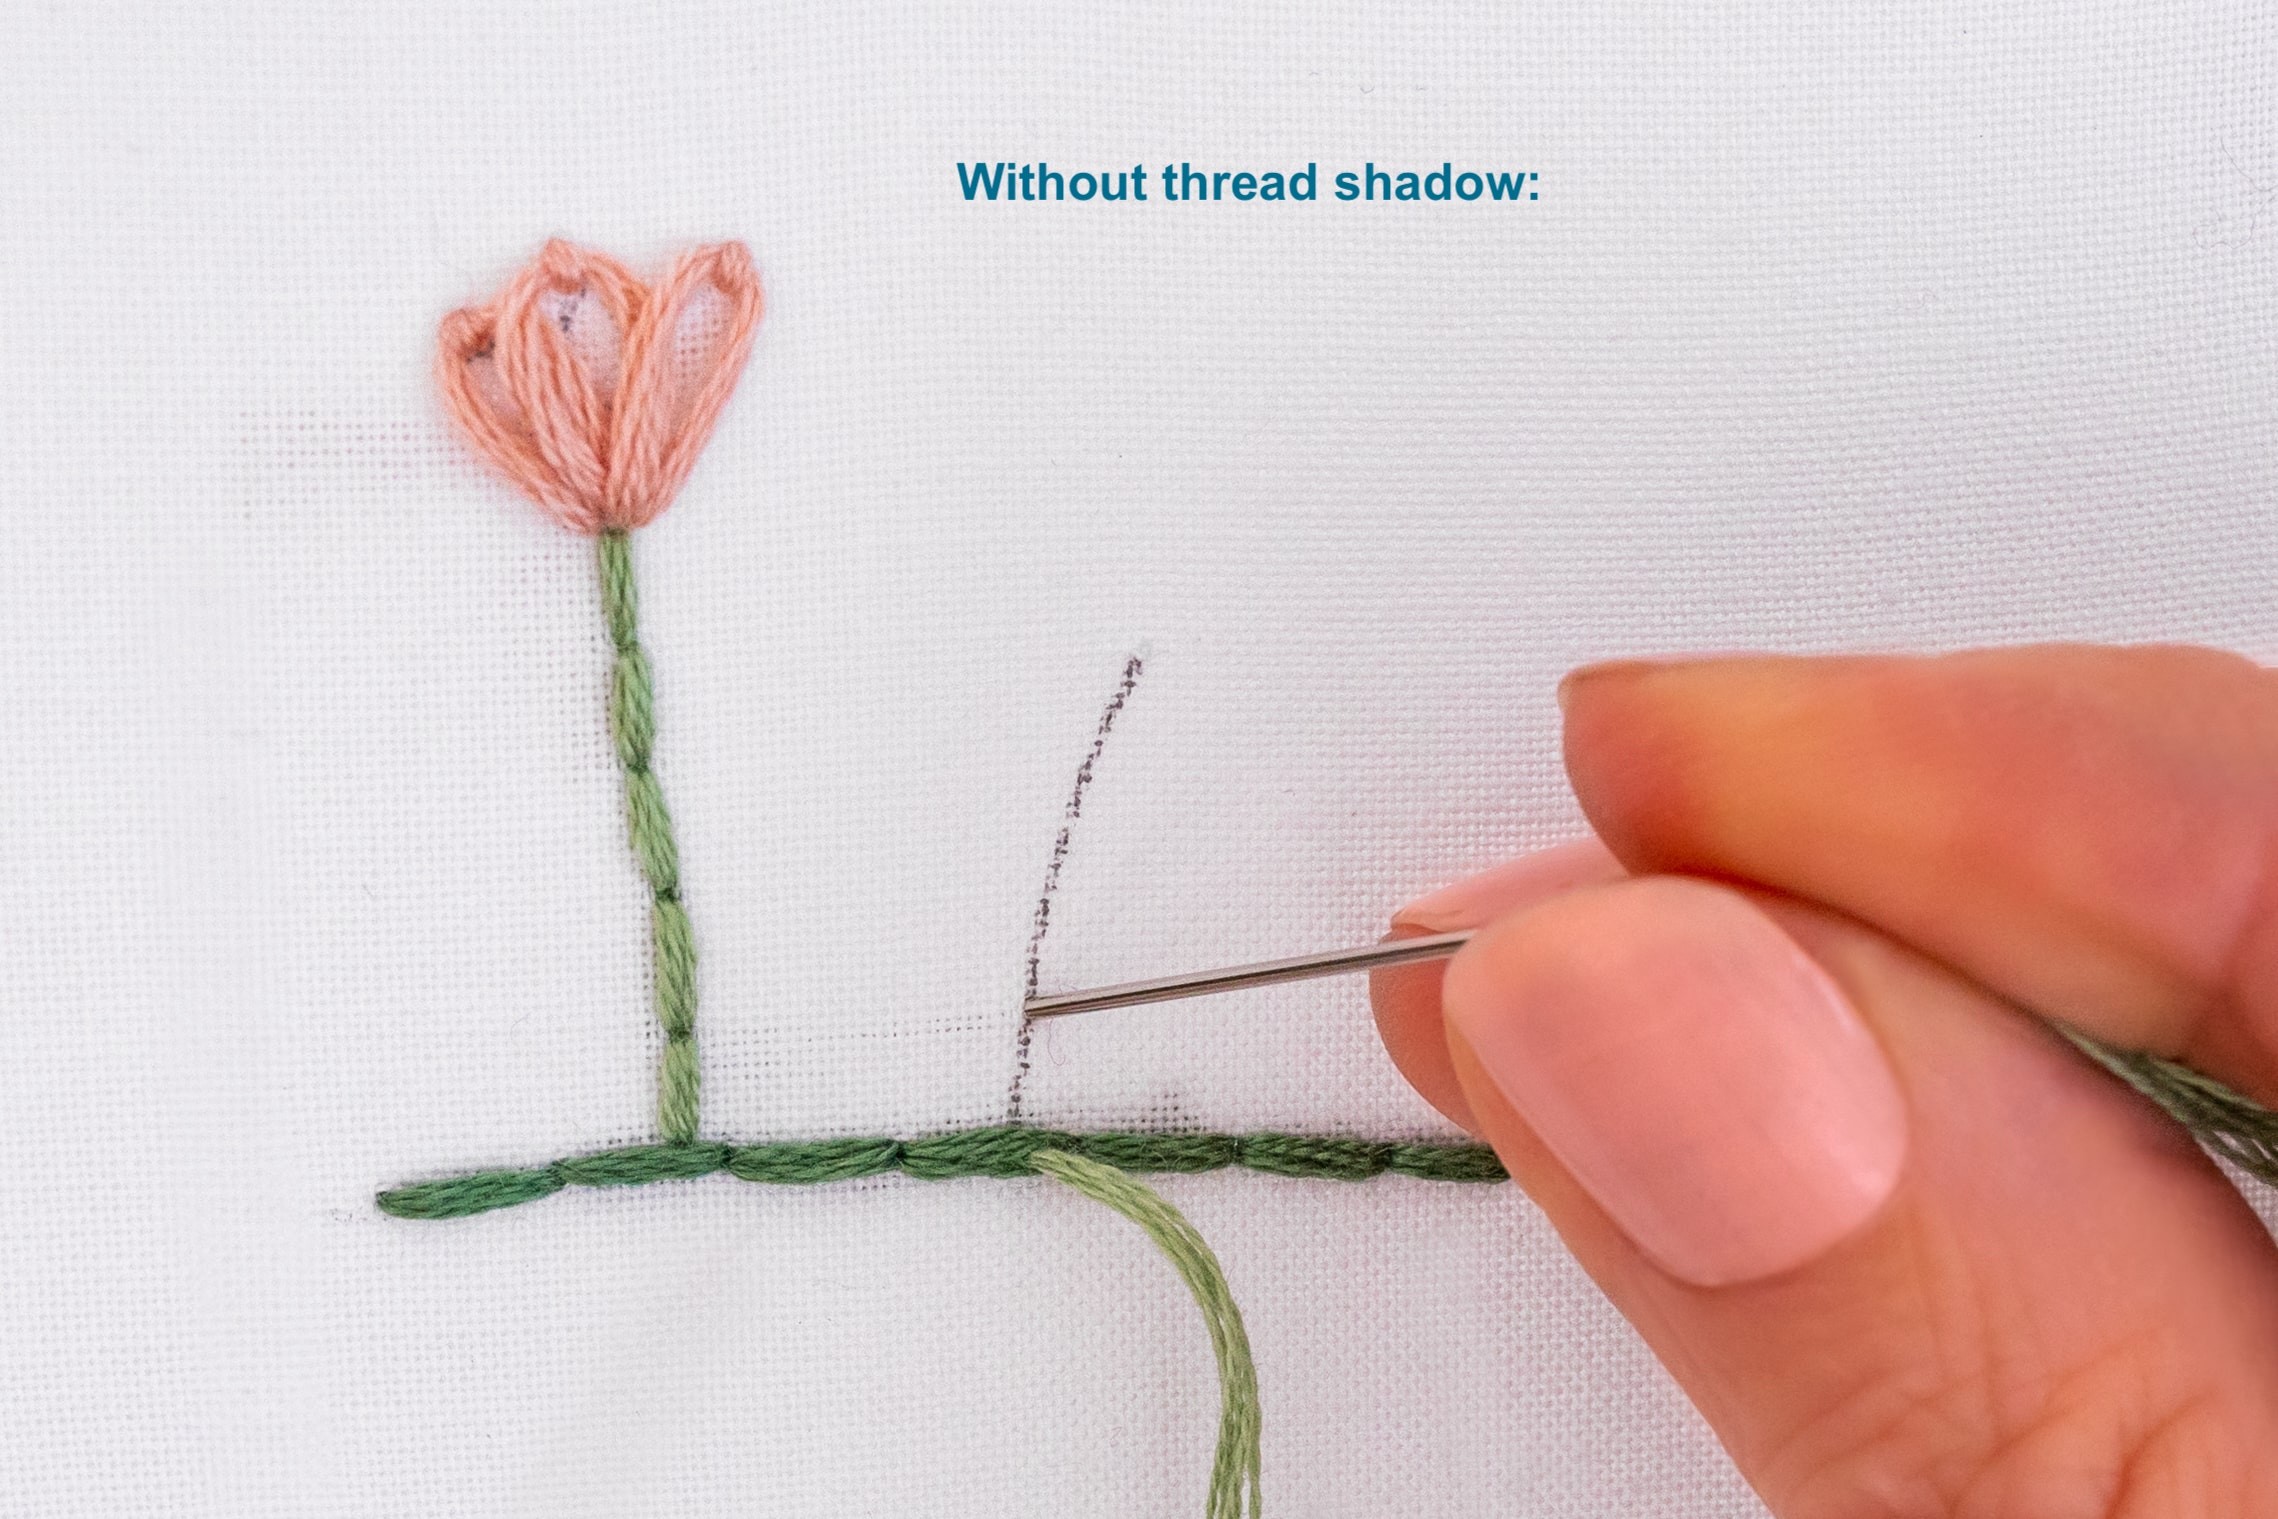 This is an image of an embroidery pattern without a thread shadow.